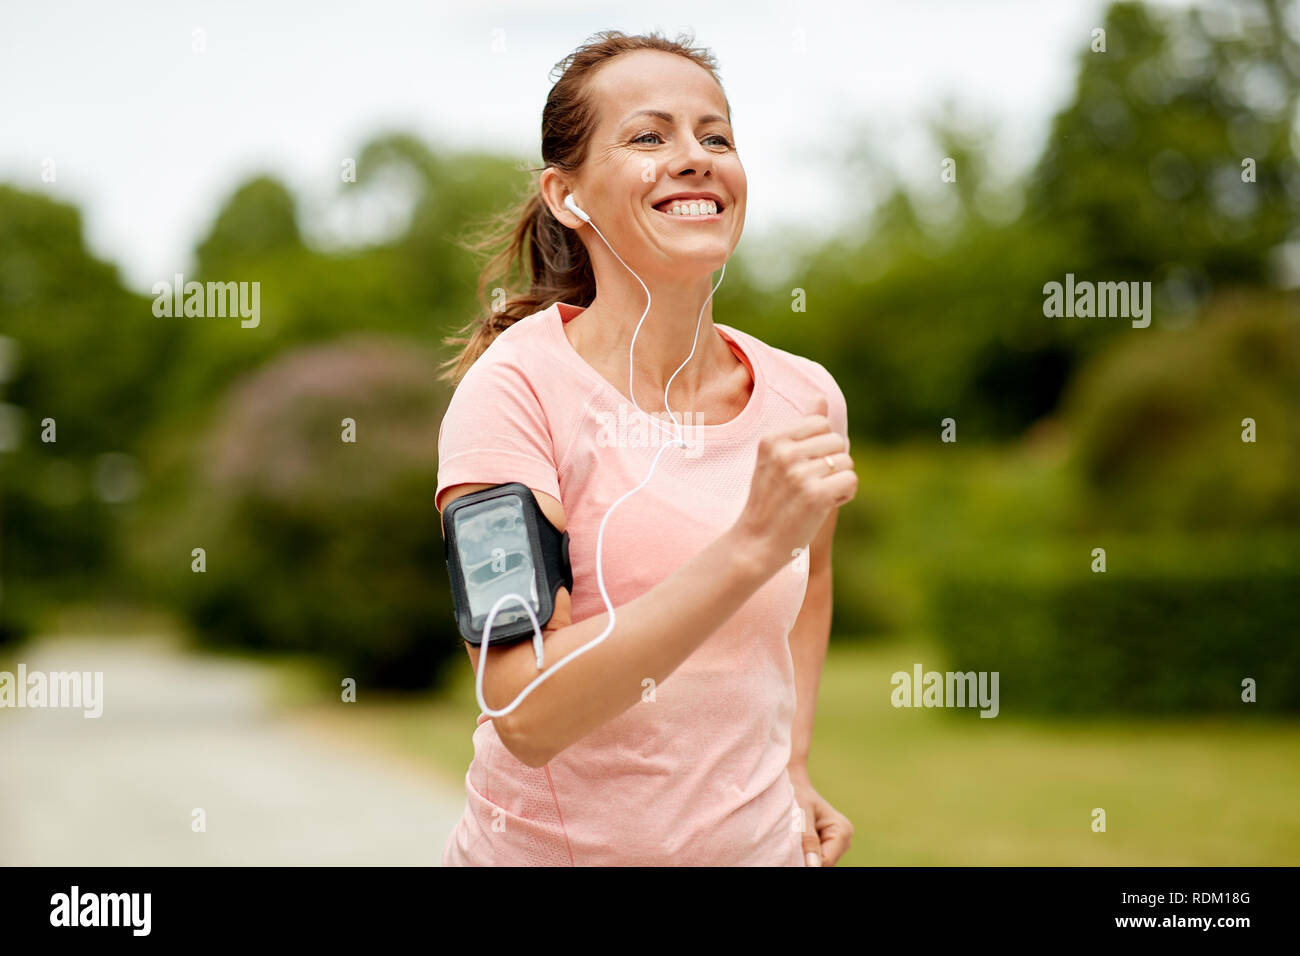 woman with earphones add armband jogging at park Stock Photo